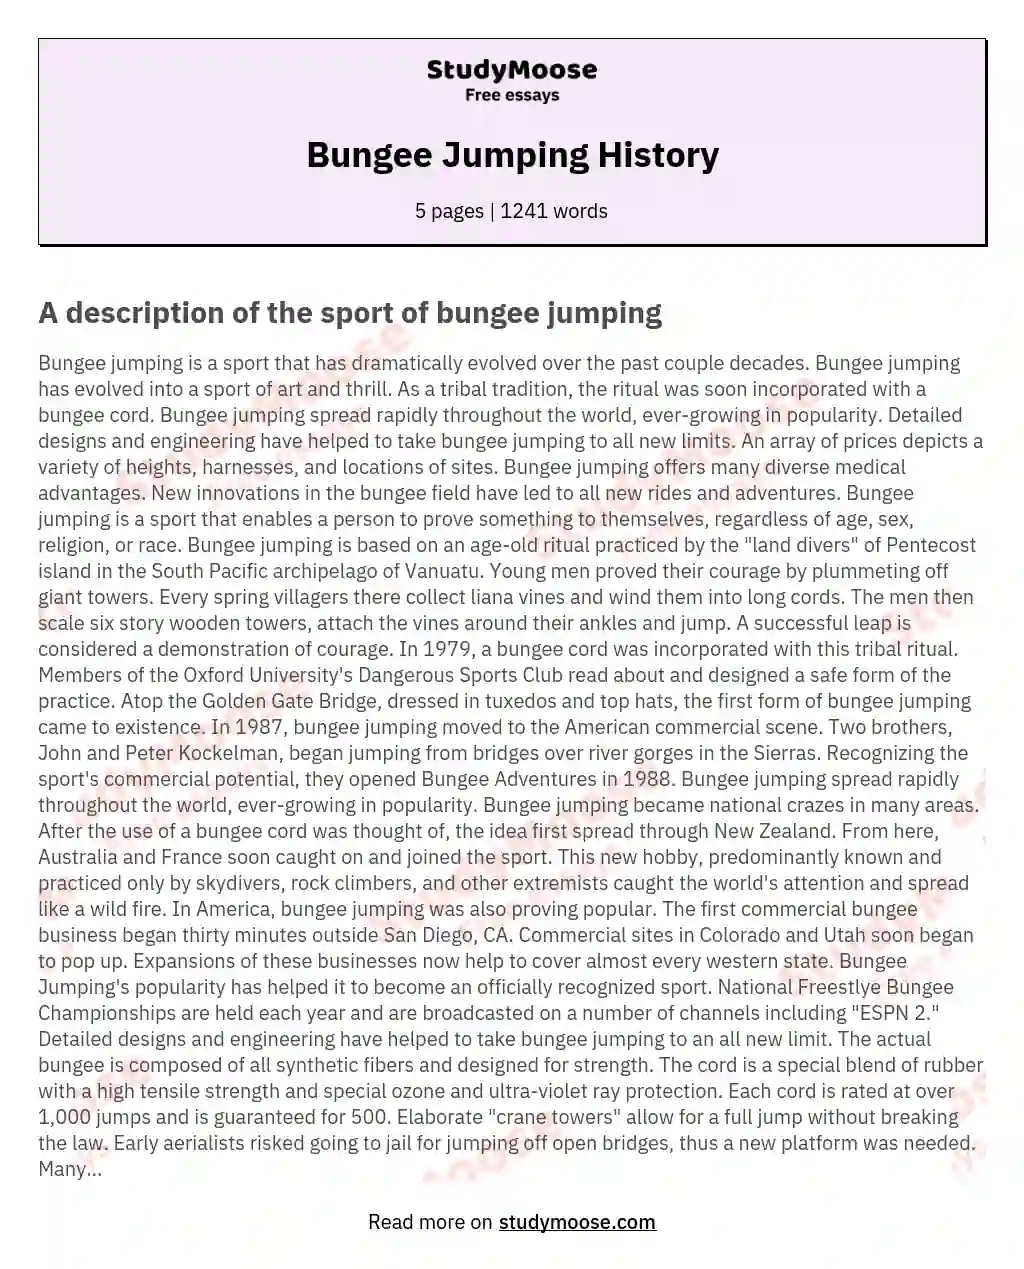 Bungee Jumping History essay